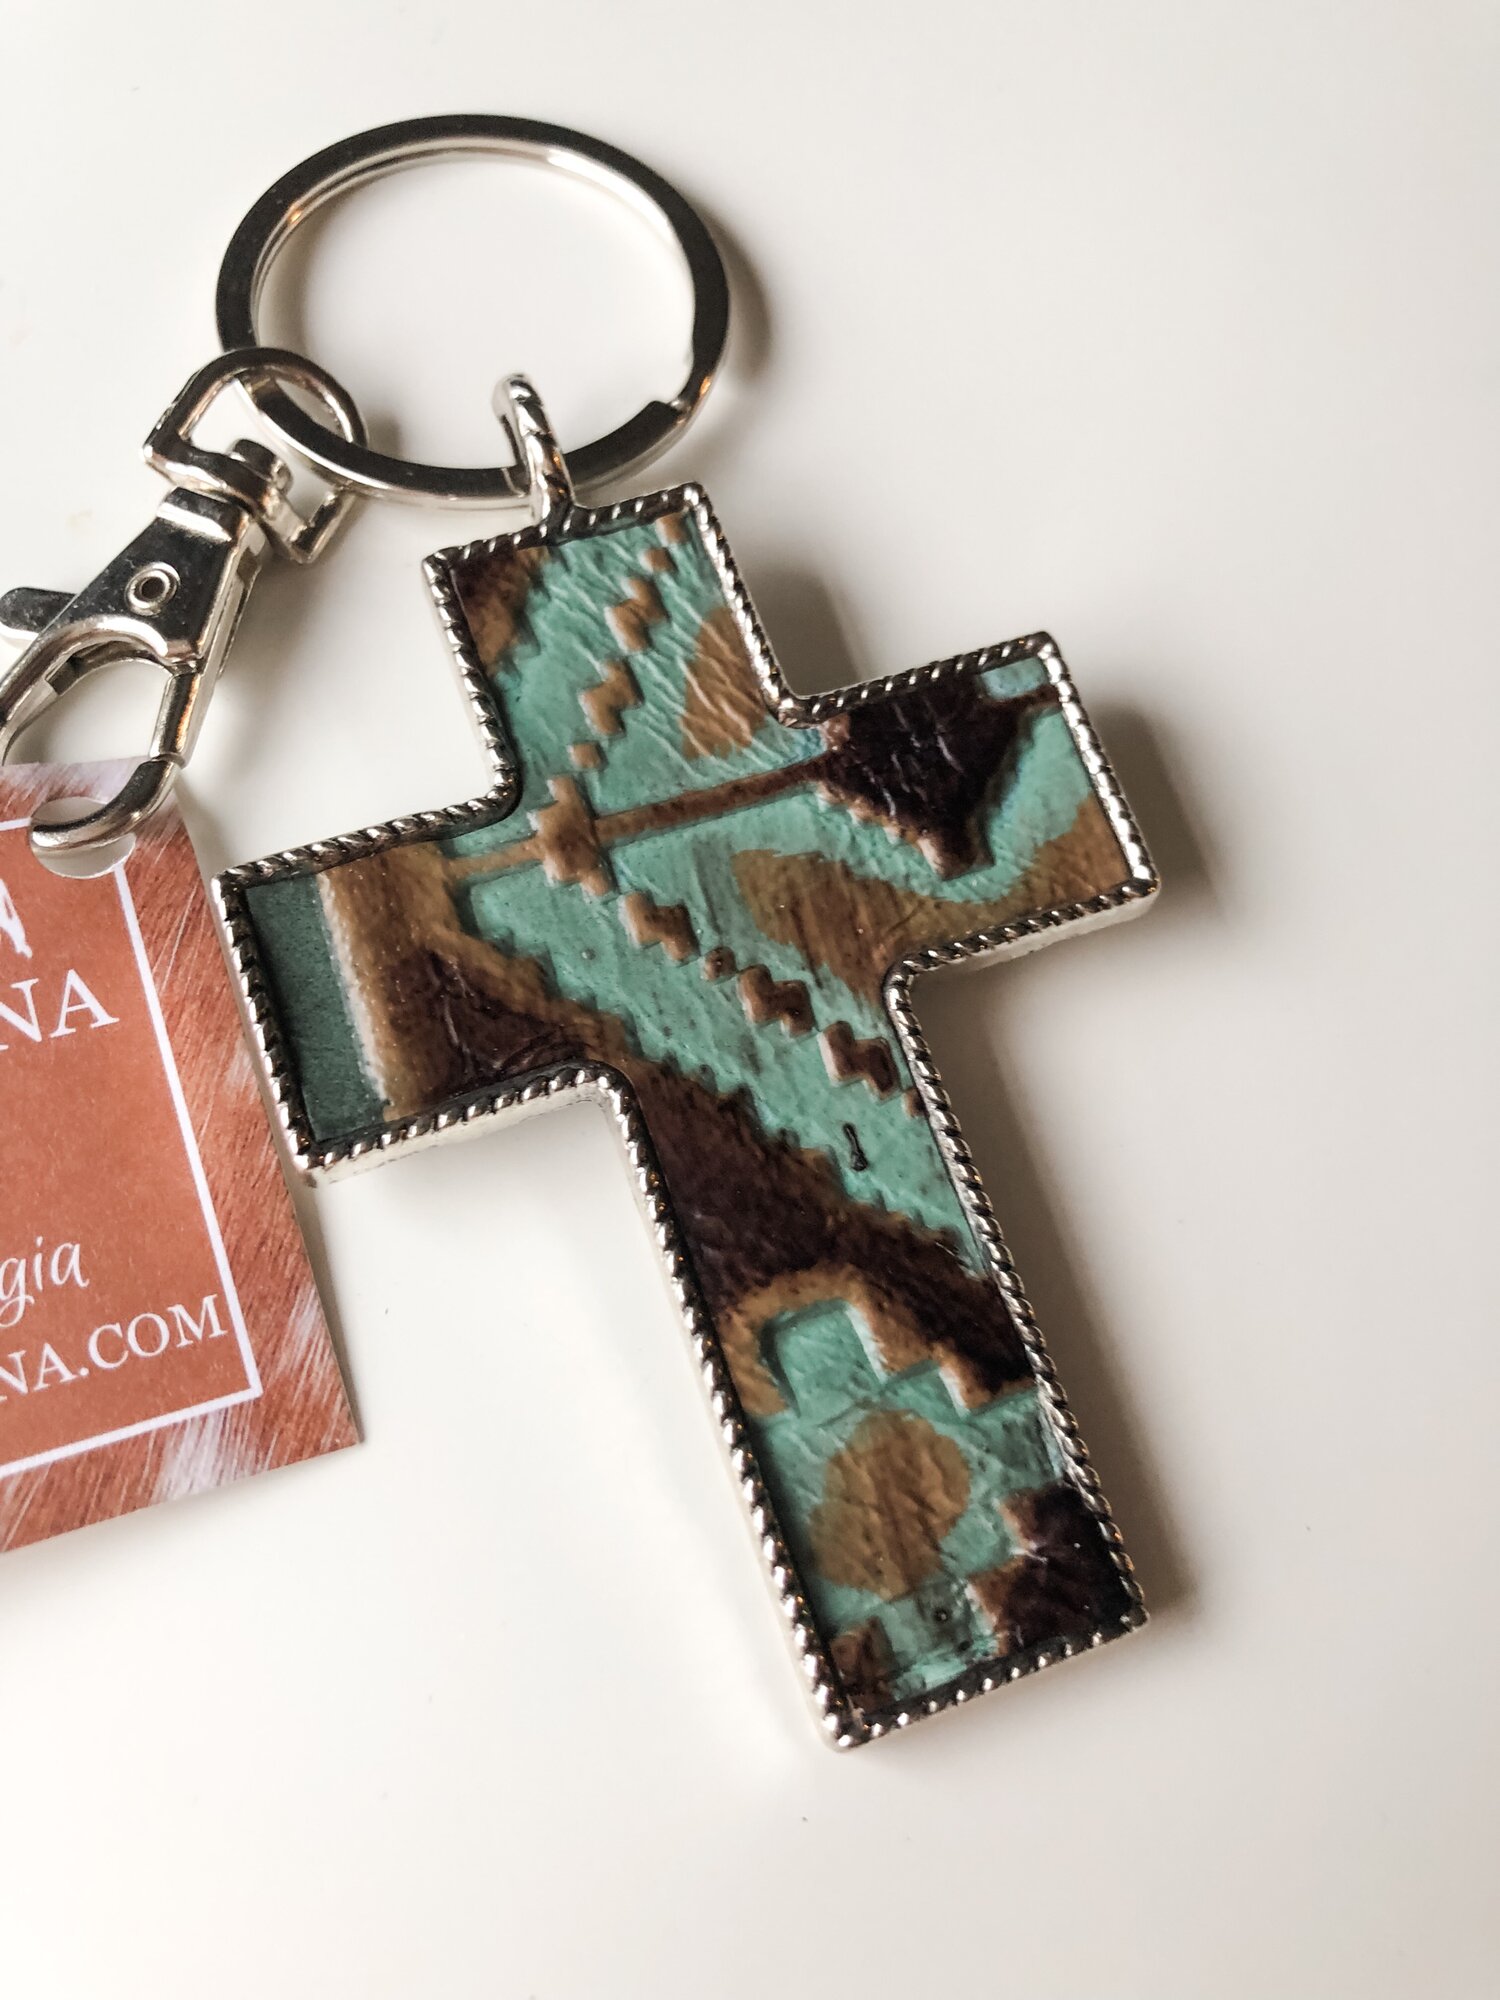 The Handcrafted Cross Keychain